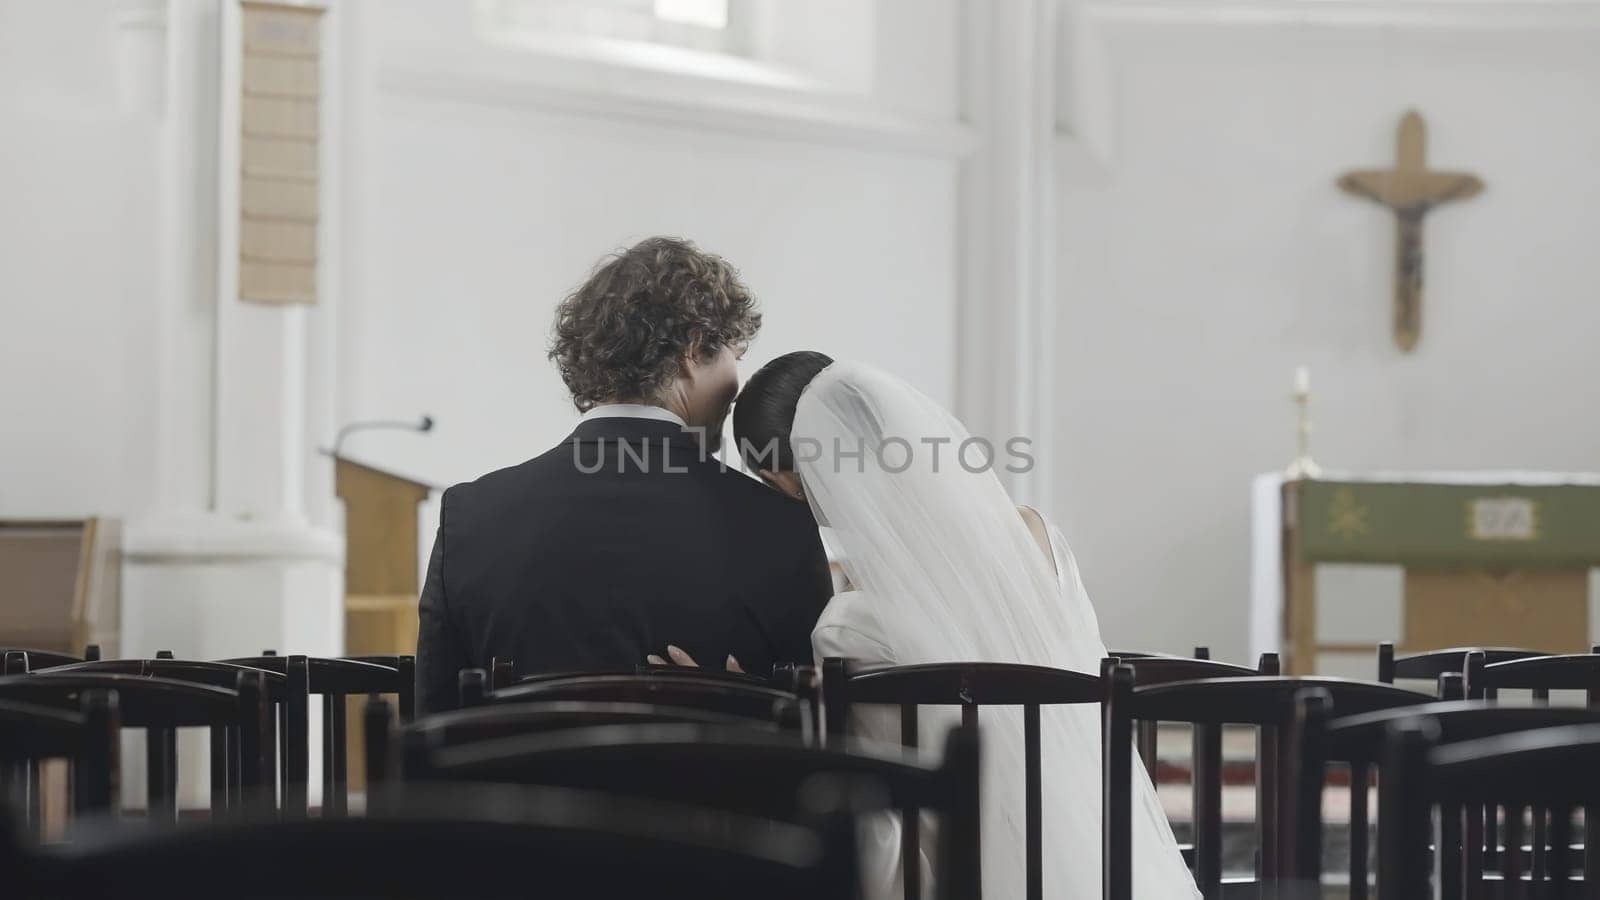 Newlyweds in love look at each other in church. Action. Beautiful newlyweds are sitting on chairs in church and looking at each other. Newlyweds in love watch and tenderly embrace while sitting in church.